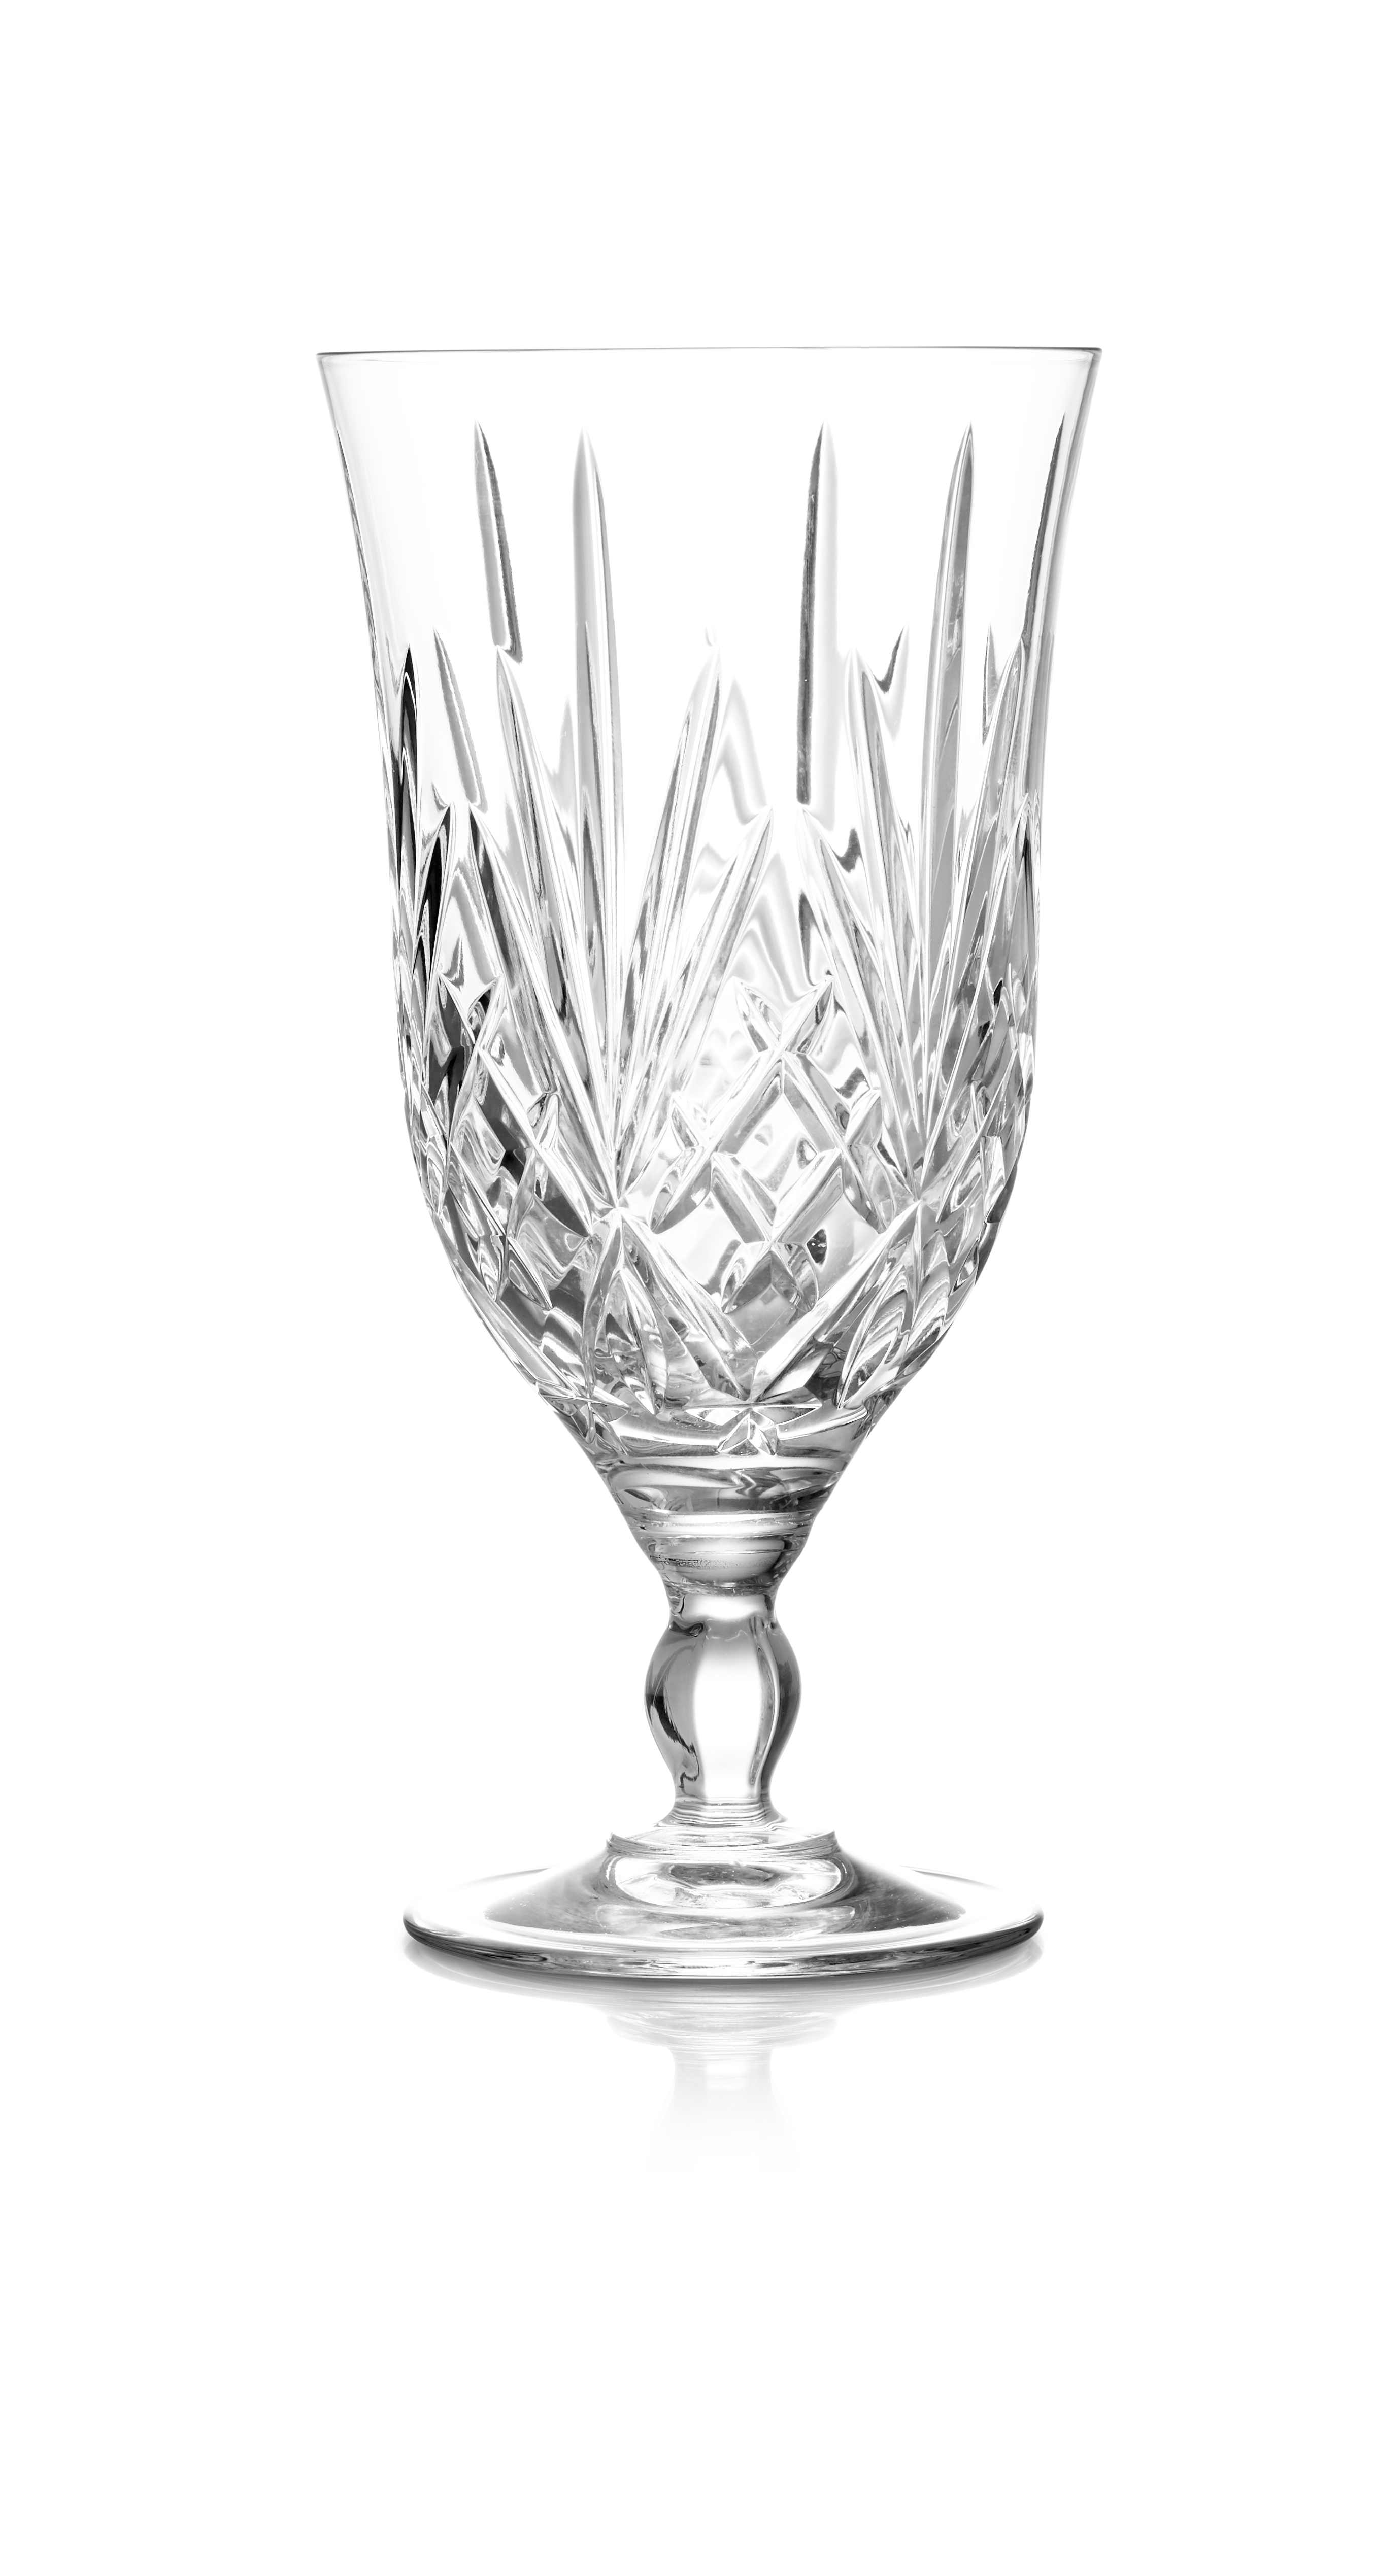 Glass St. Charles Stem Goblet Water Clear 13.5 Oz